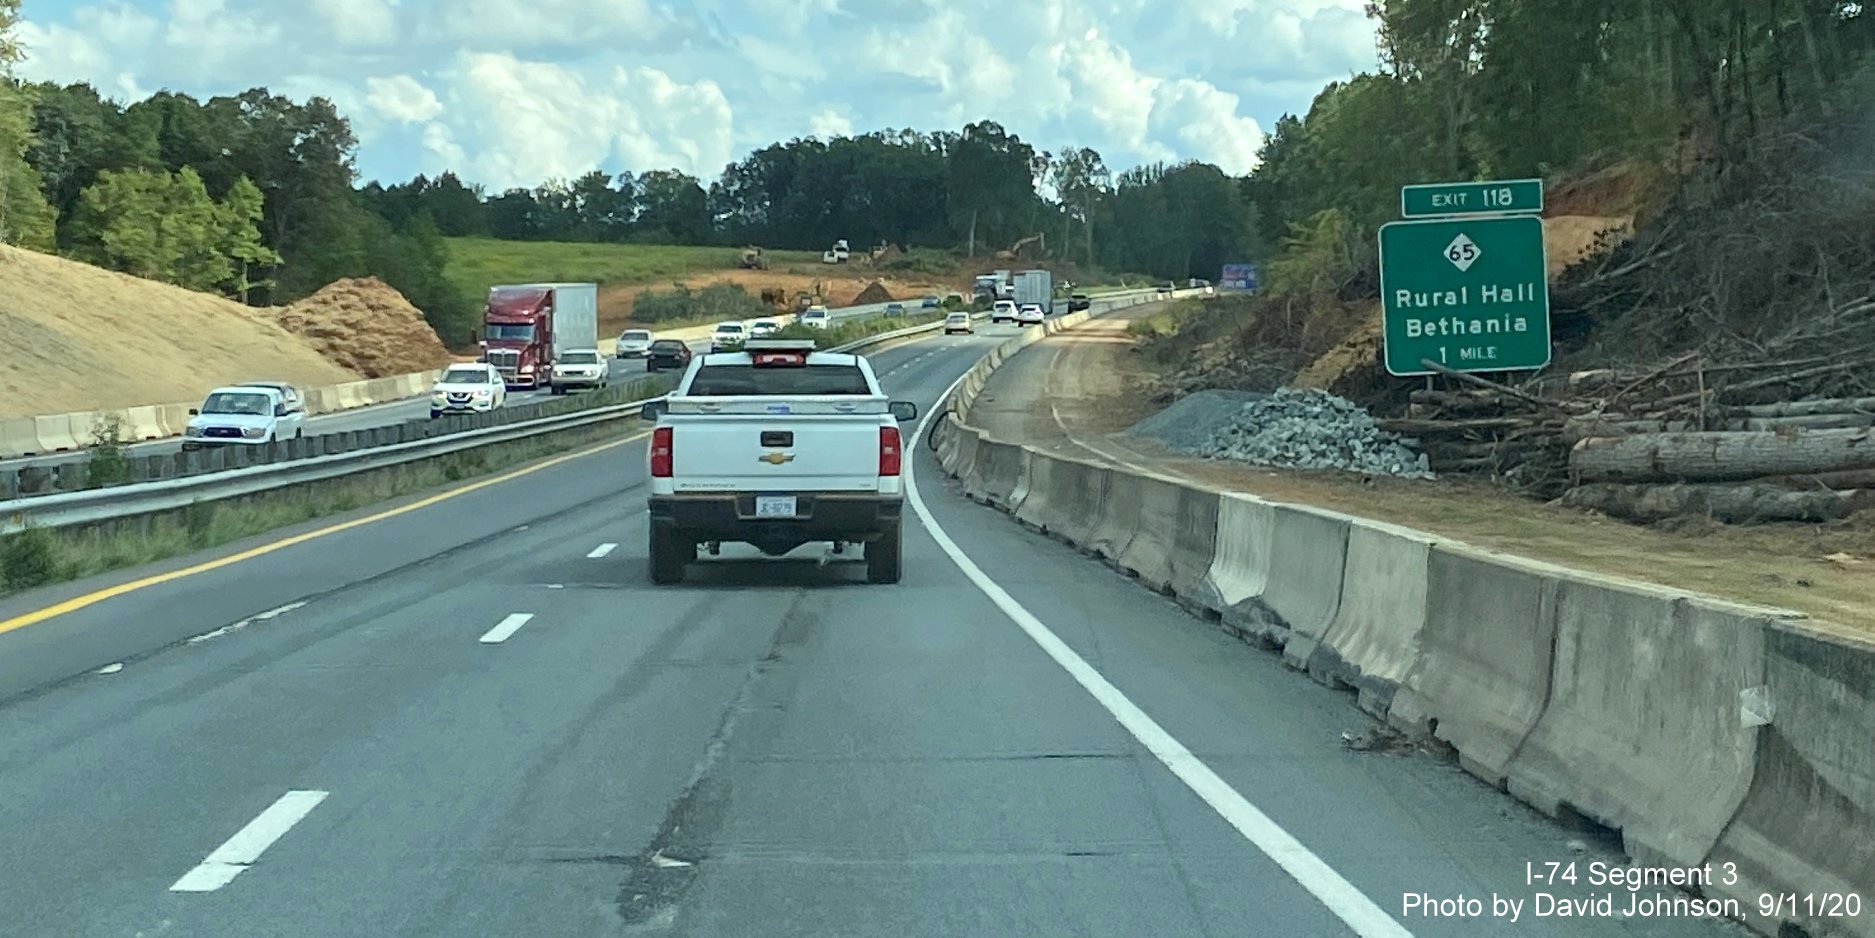 Image of widening work along US 52 South 1 mile before NC 65 exit as part of future I-74 Winston Salem Northern Beltway interchange construction, by David Johnson September 2020